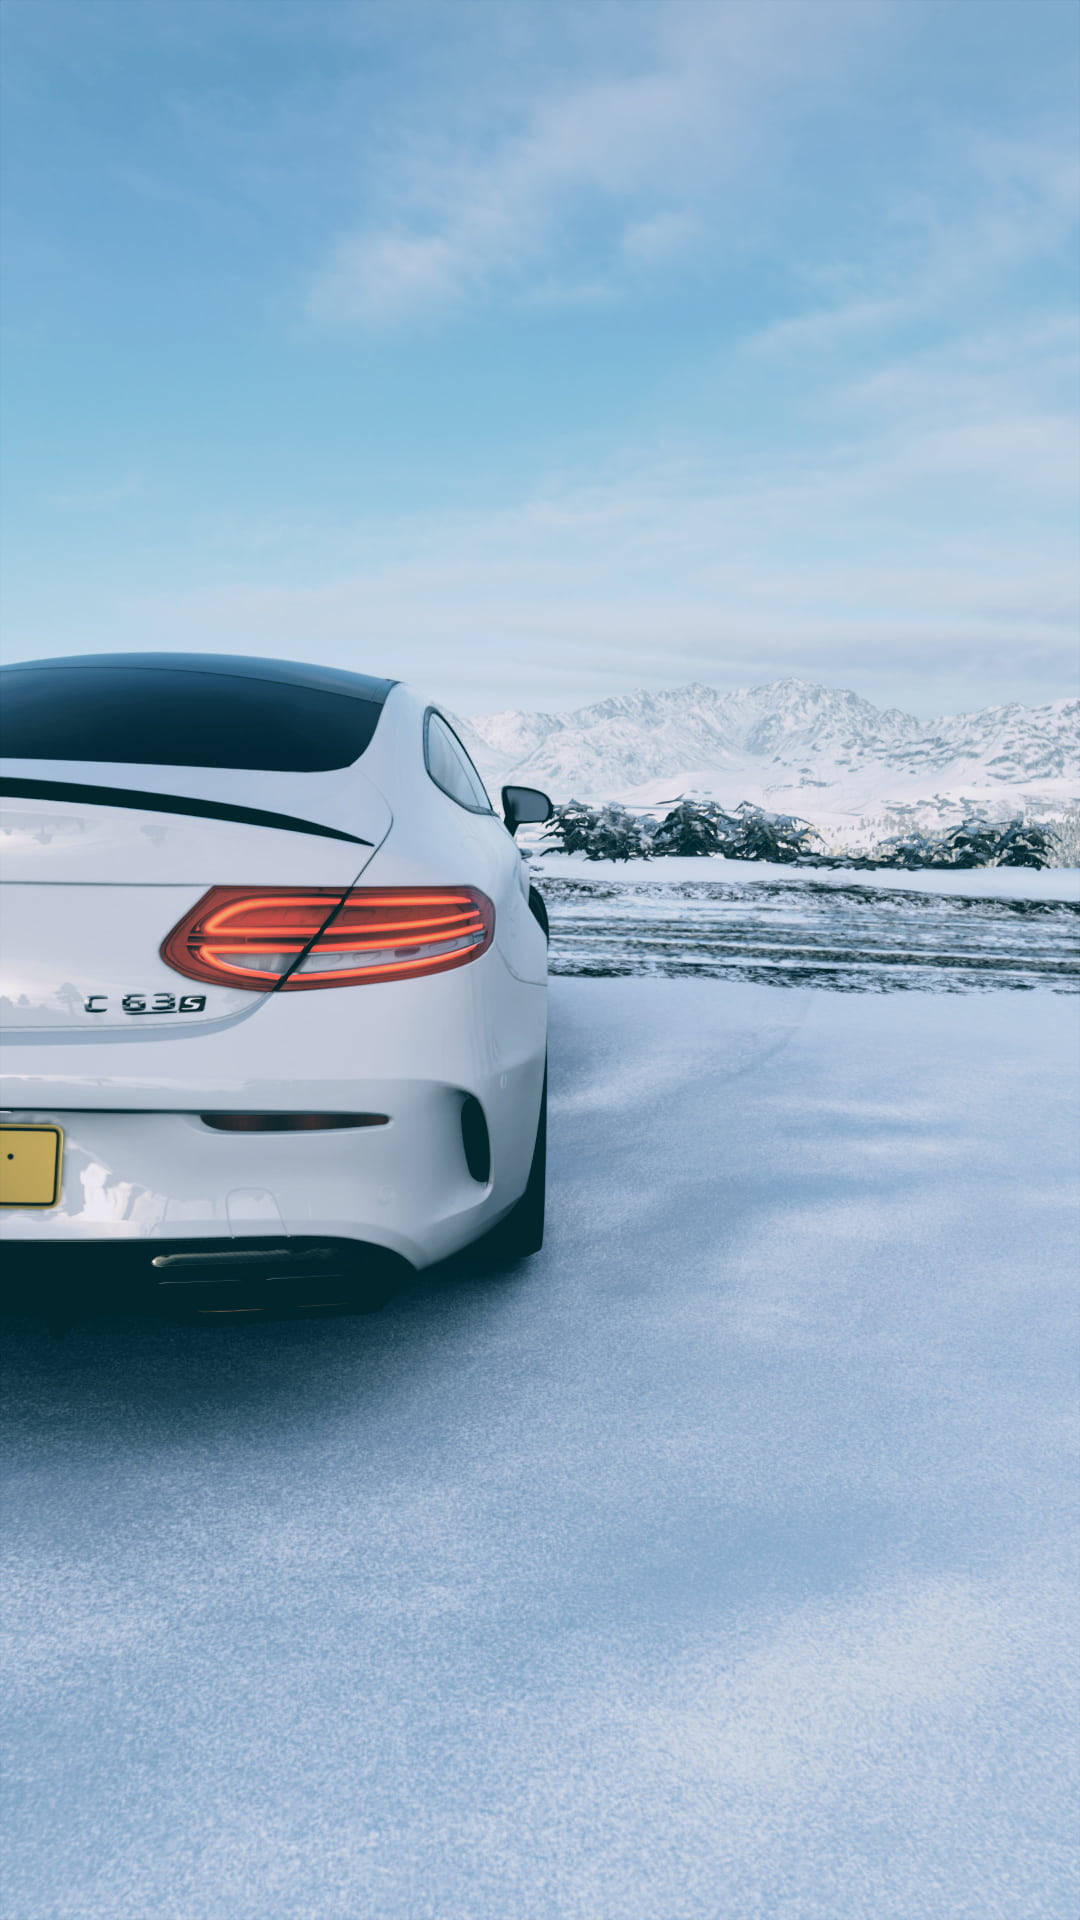 Mercedes Amg With Snow Iphone Wallpaper